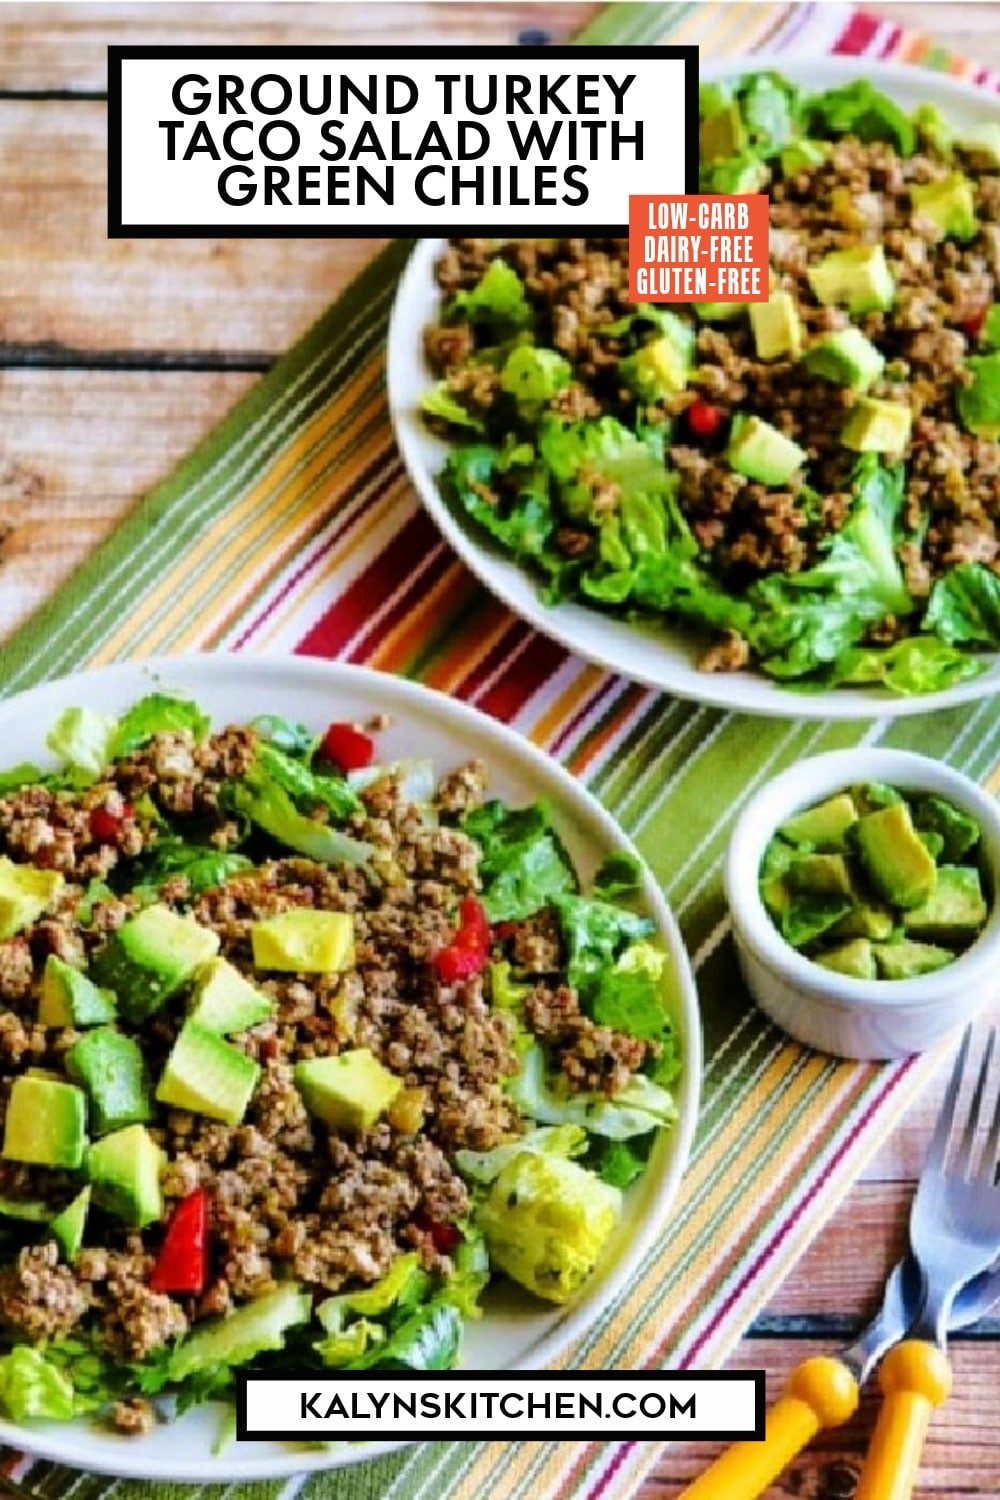 Pinterest image of Ground Turkey Taco Salad with Green Chiles